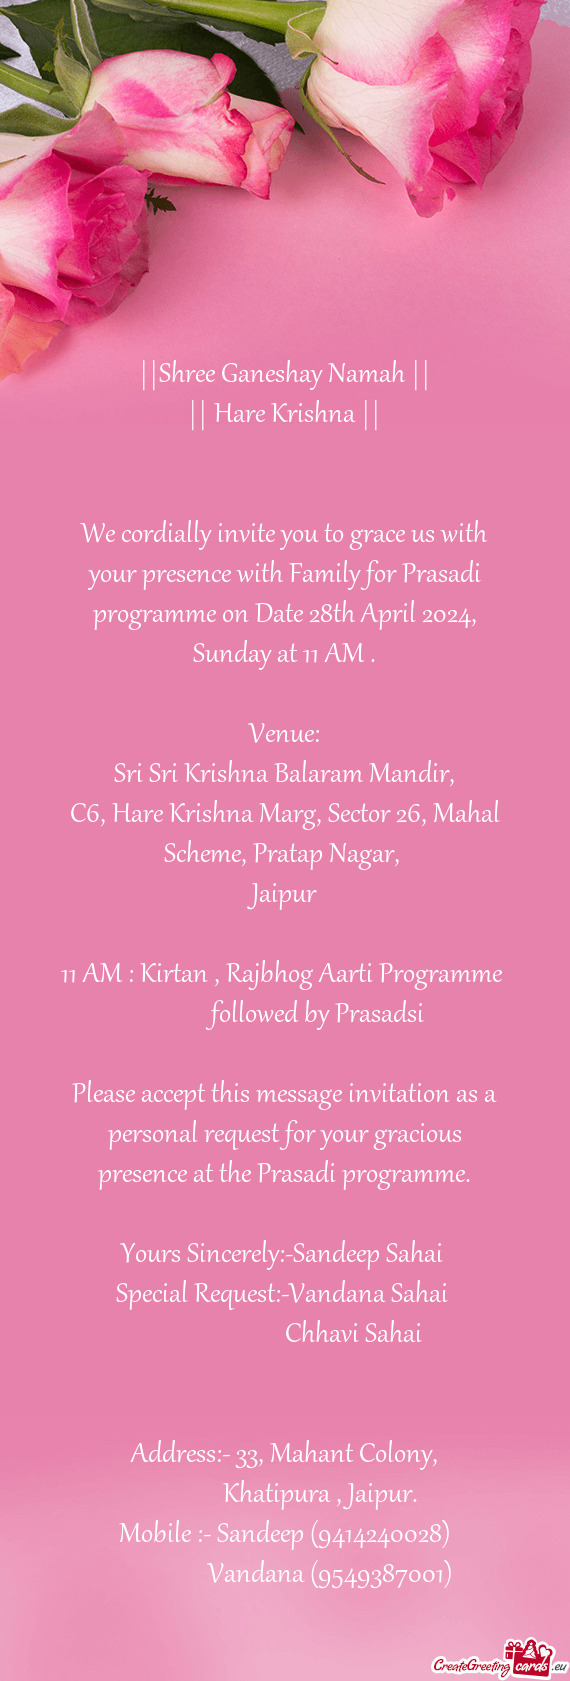 We cordially invite you to grace us with your presence with Family for Prasadi programme on Date 28t